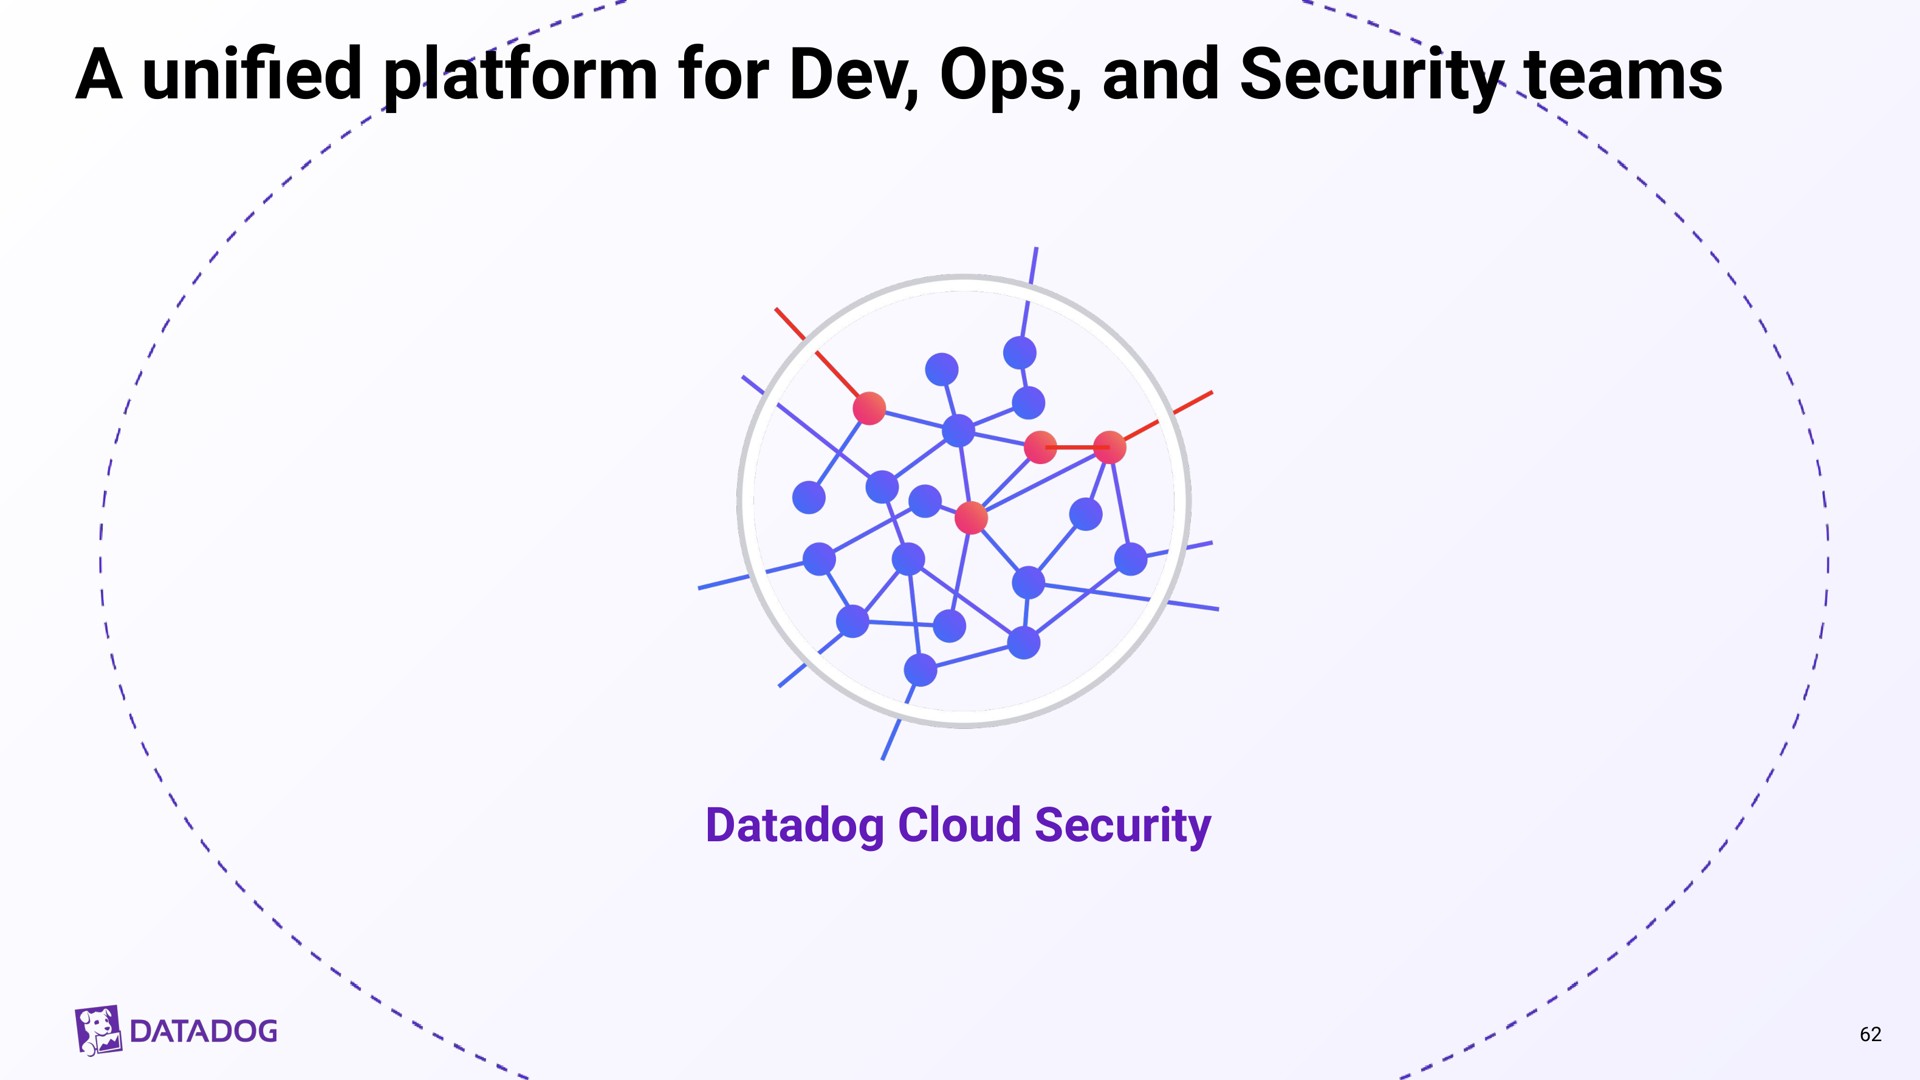 a platform for dev and security teams unified | Datadog